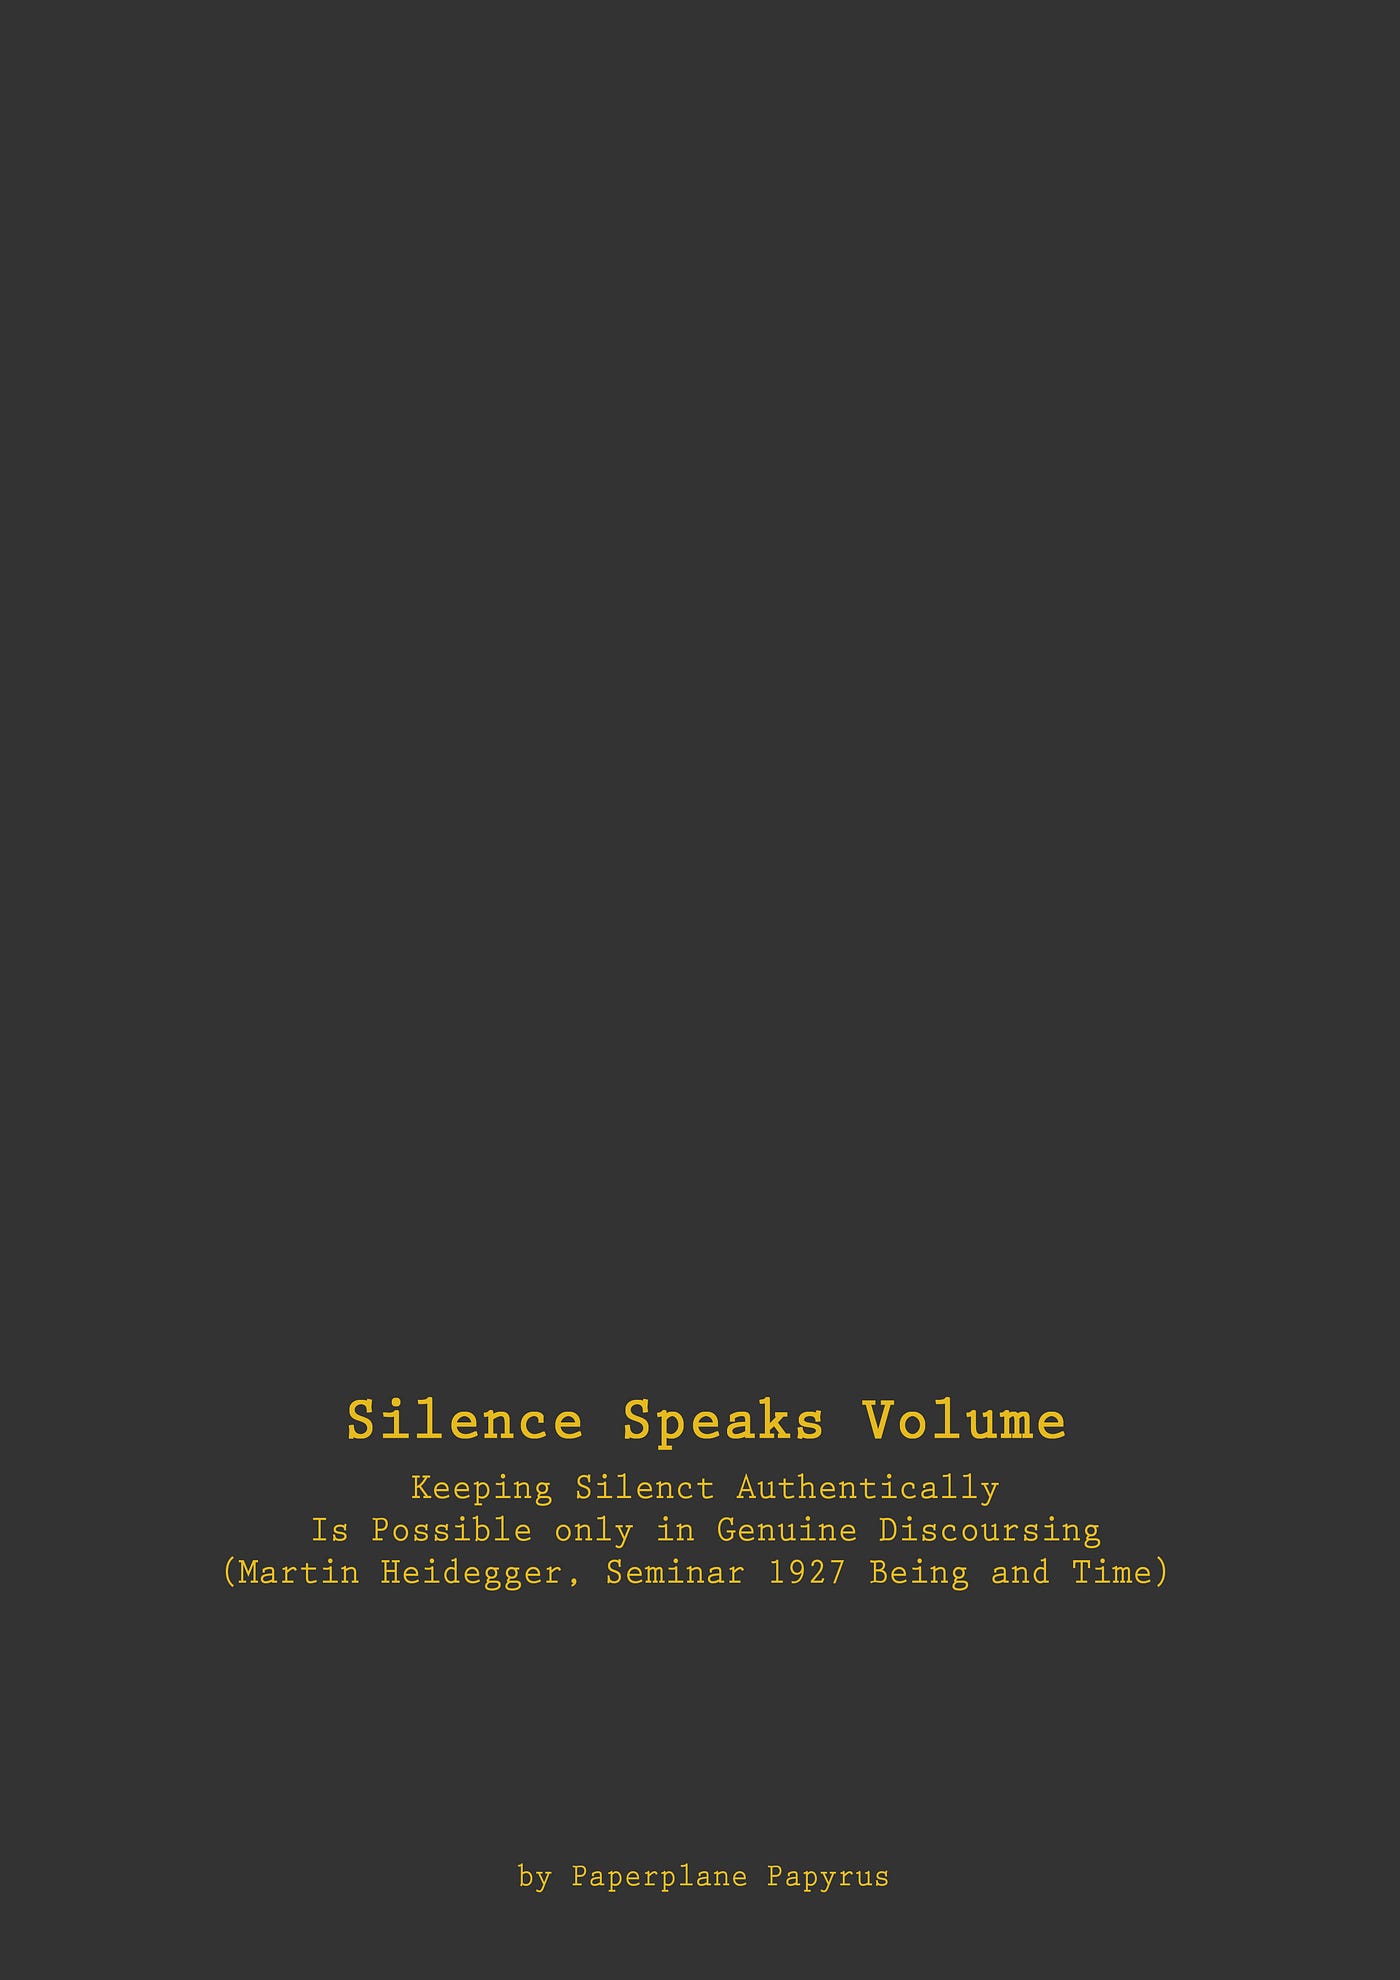 Silence Speaks Volume. Silence, One of the Great Arts of… | by Paperplane  Papyrus | Medium